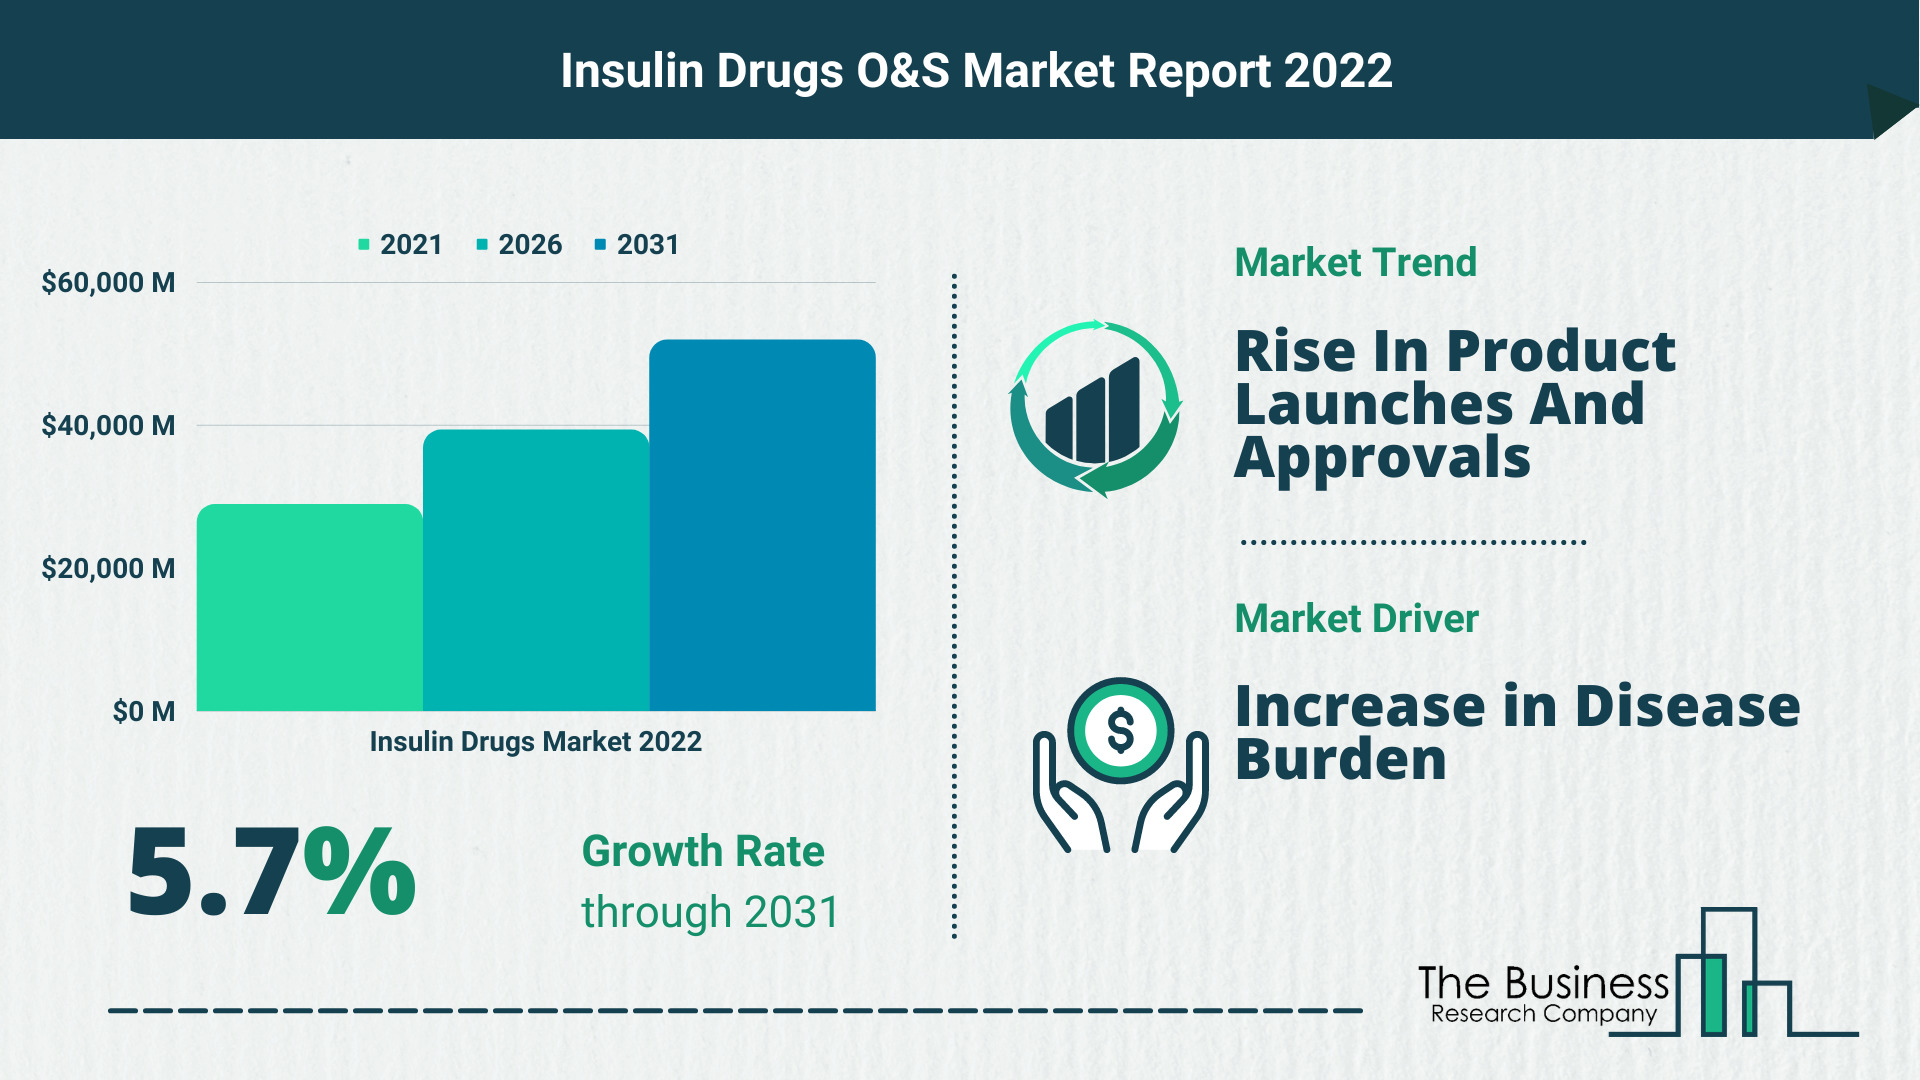 Growth Driving Opportunities And Strategies In The Insulin Drugs Market